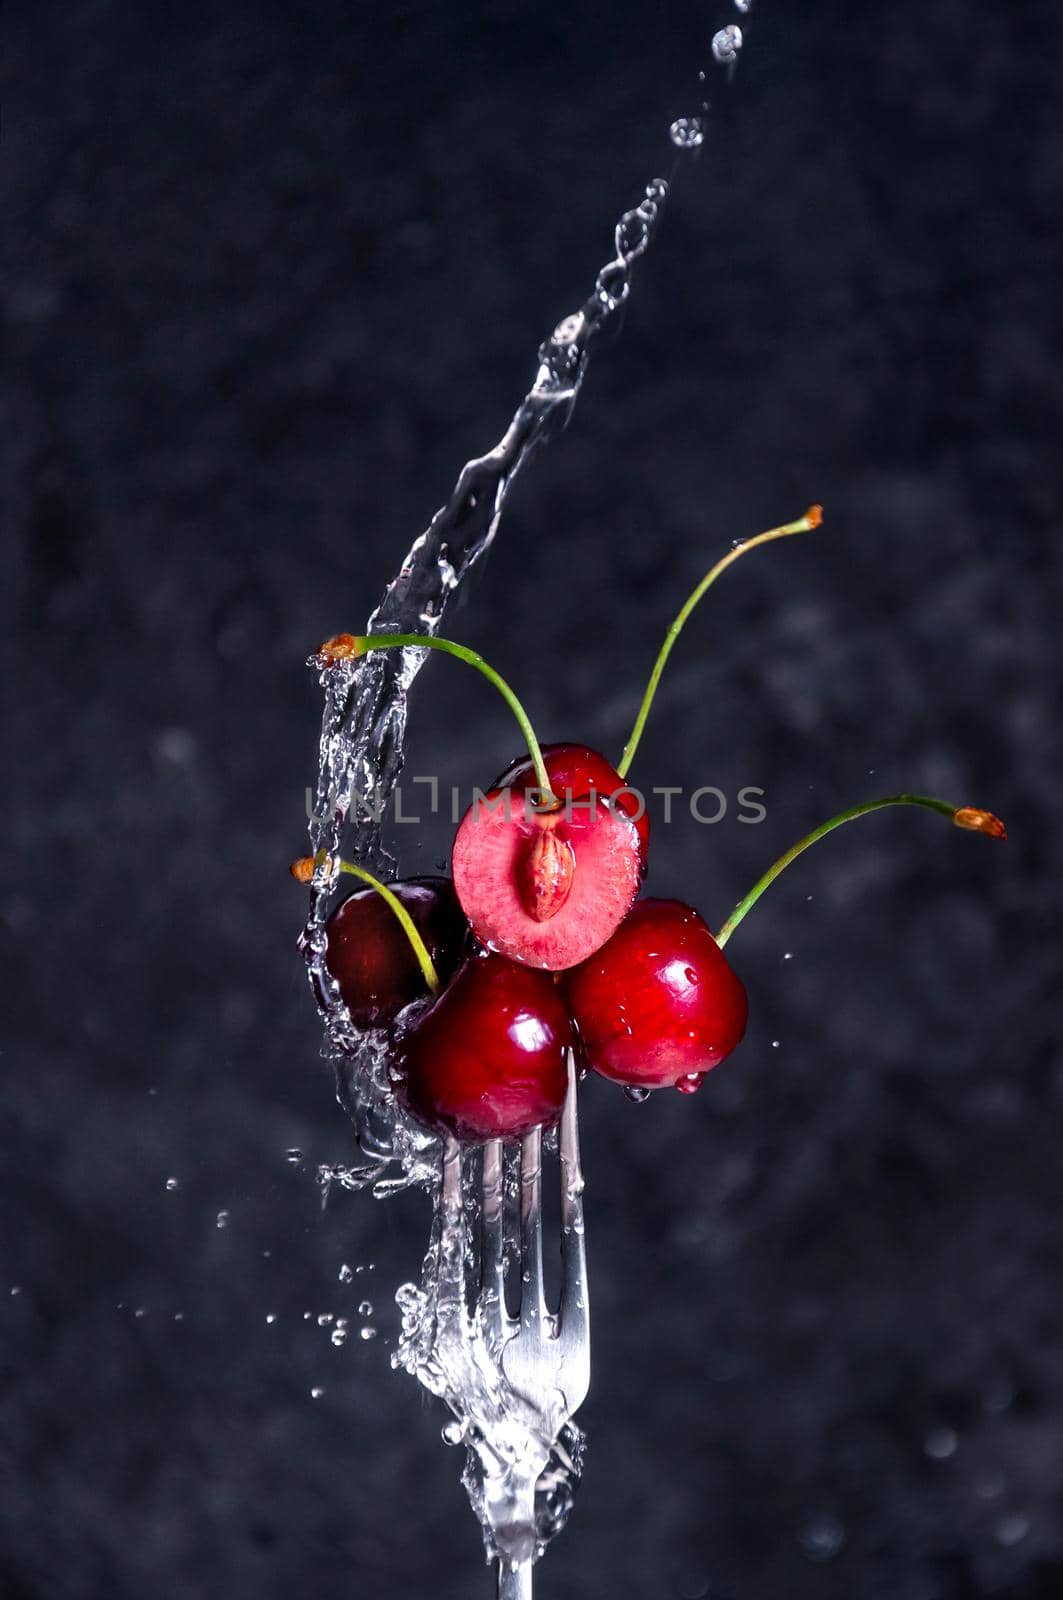 Close up Composition of Cherries on Fork Flying in the air with Water Splashes on the Dark Background by Svetlana_Belozerova